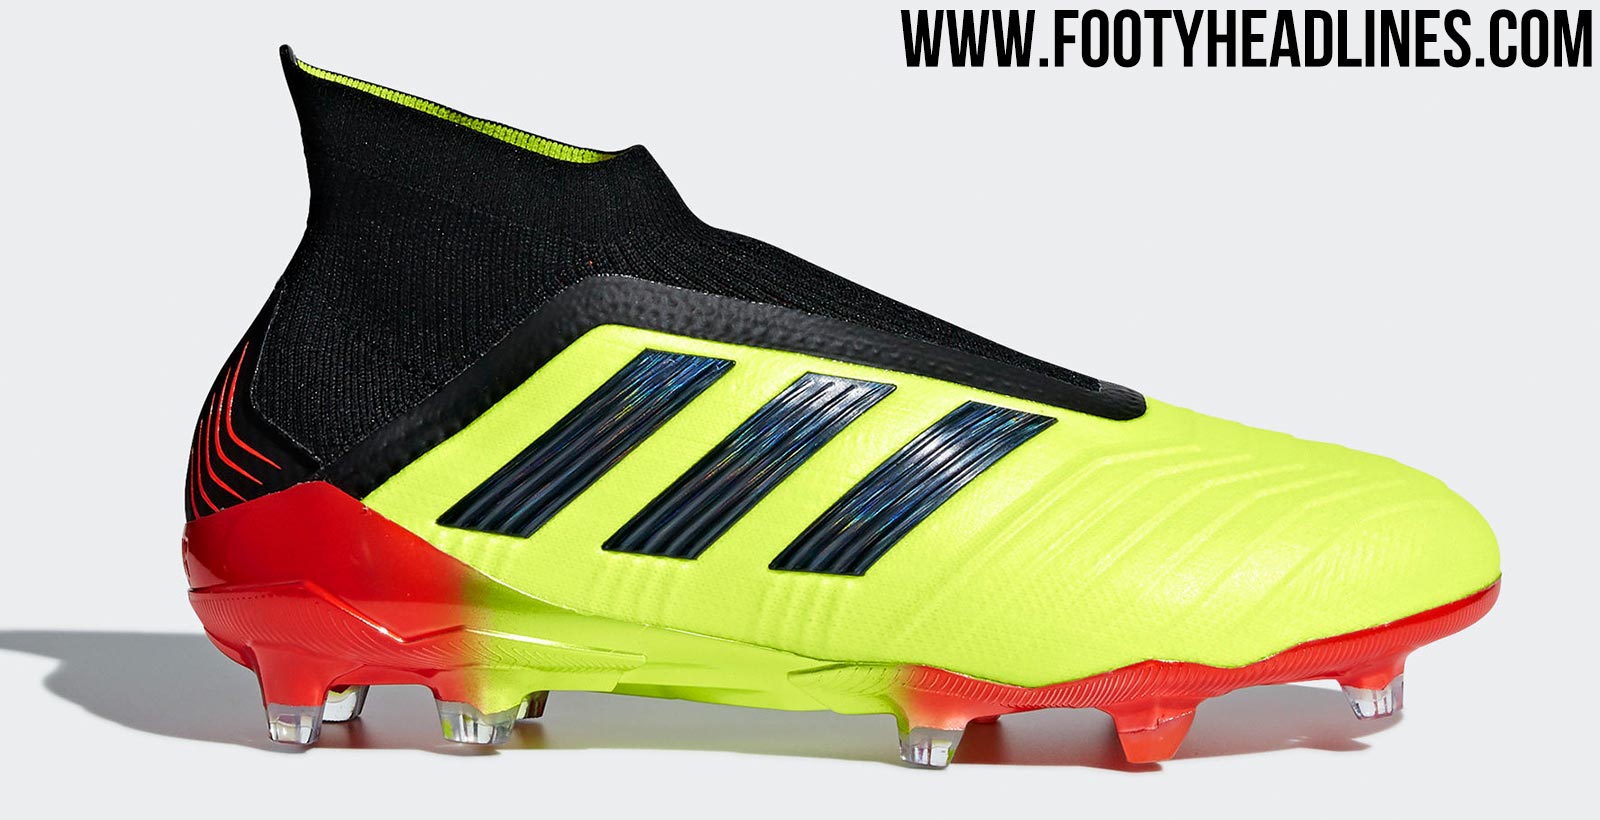 Energy Mode' Adidas Predator 2018 Cup Boots - Footy